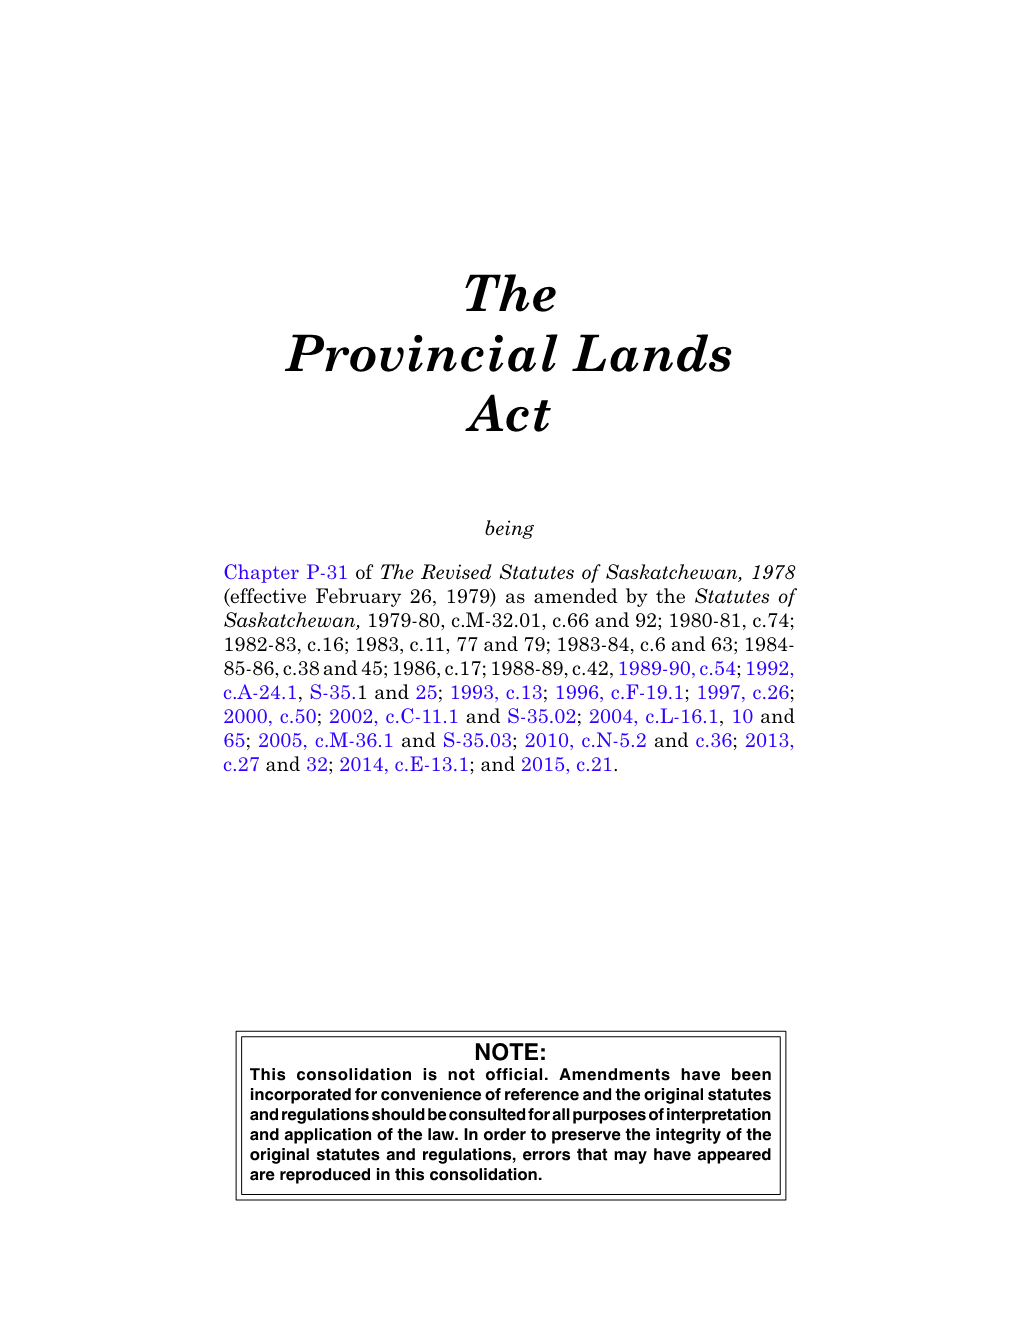 The Provincial Lands Act